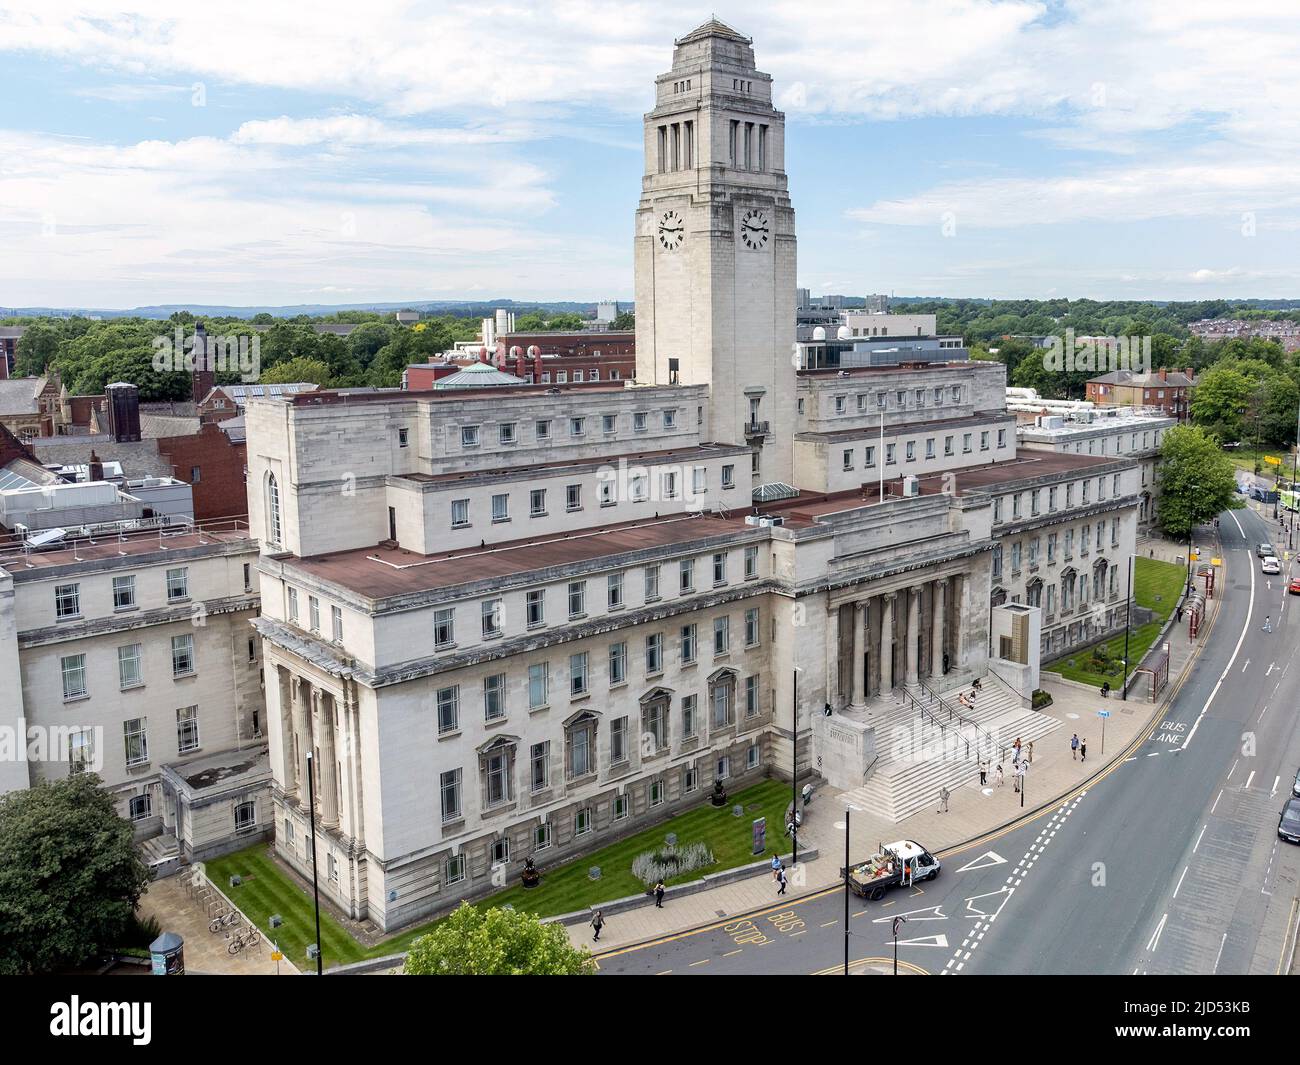 Leeds university, Leeds West Yorkshire. Northern university in England, United Kingdom. Aerial view of the iconic university building Stock Photo